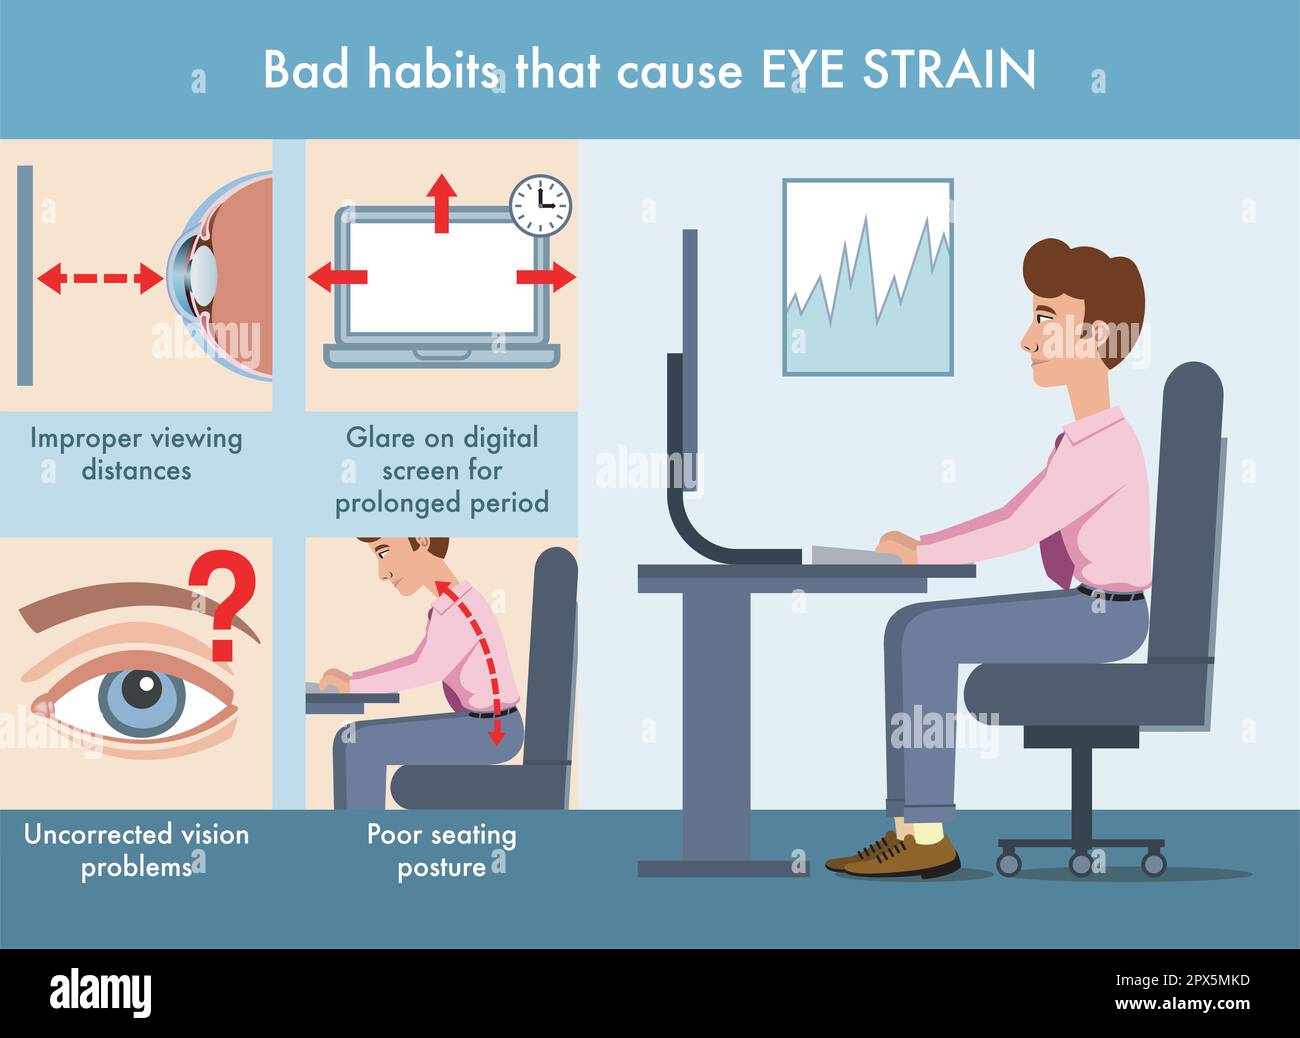 Simple illustration of bad habits that cause eye strain, with annotations. Stock Vector